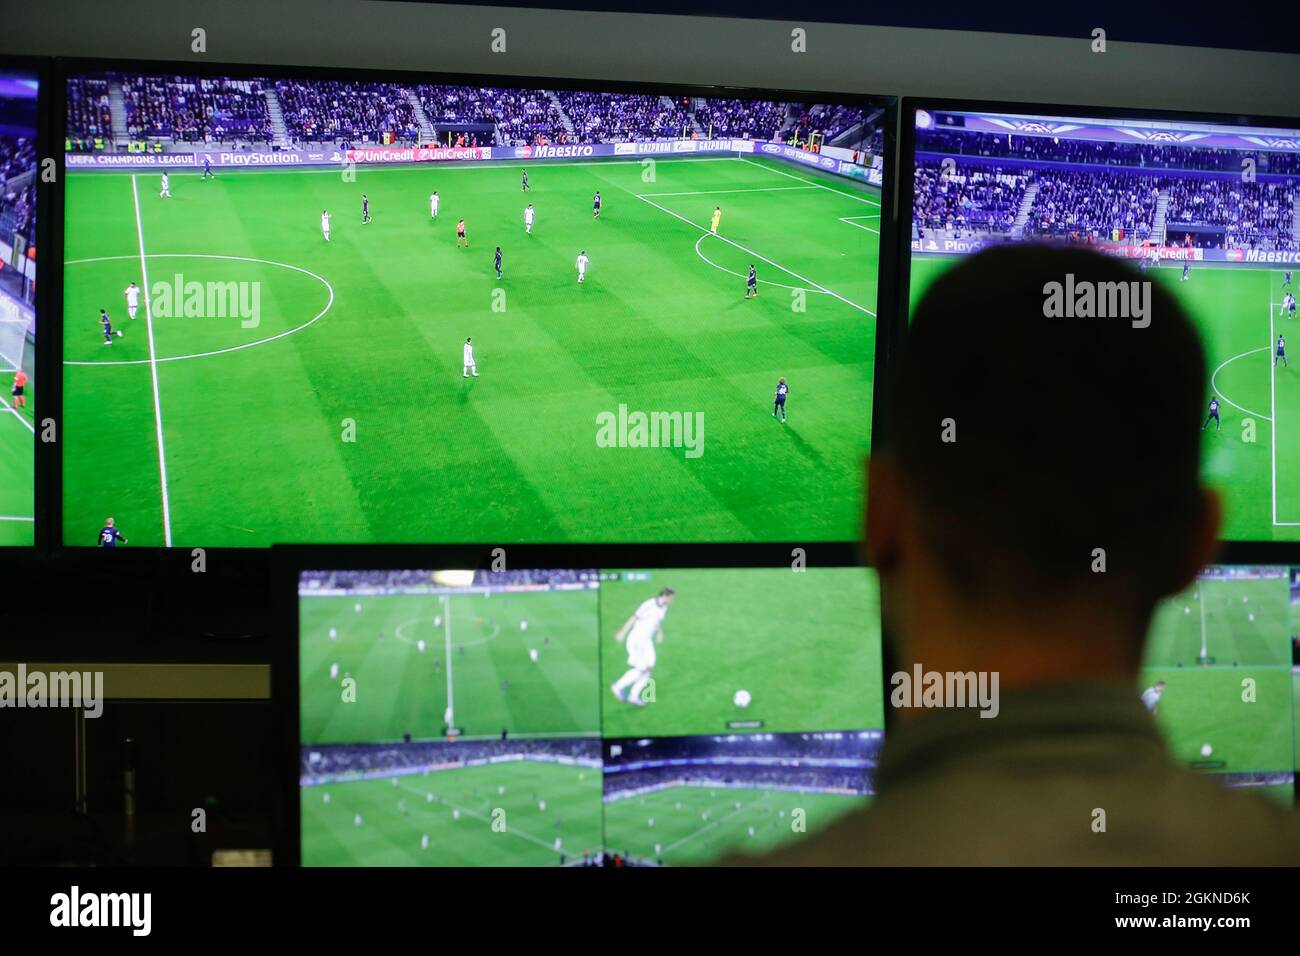 Bucharest, Romania - September 15, 2021: A referee is showing to the press how the video assistant referee (VAR) system works. Stock Photo